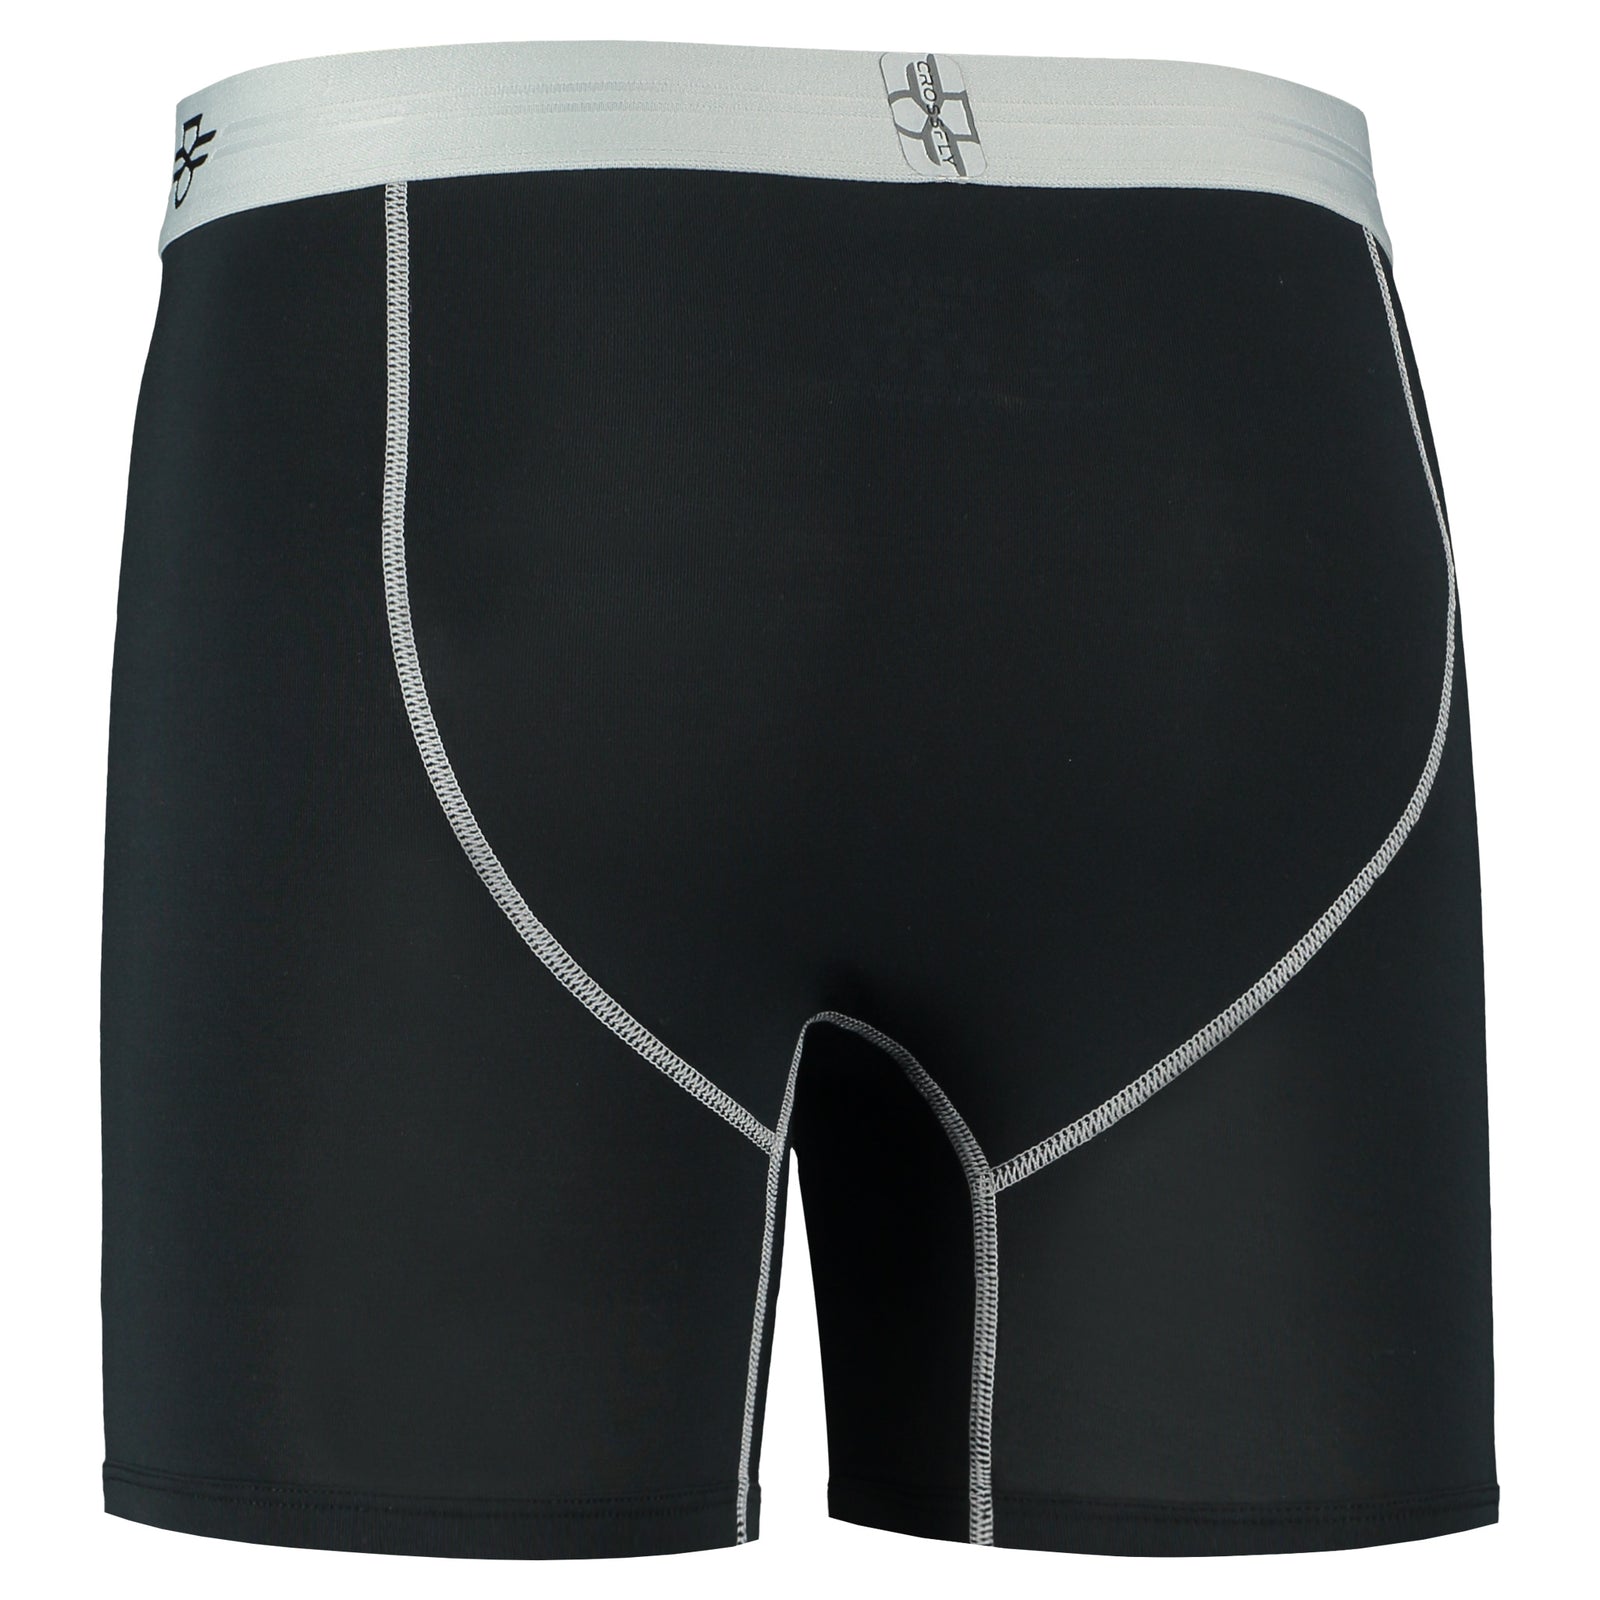 The 10 Best Pouch Underwear (For Extra Support)